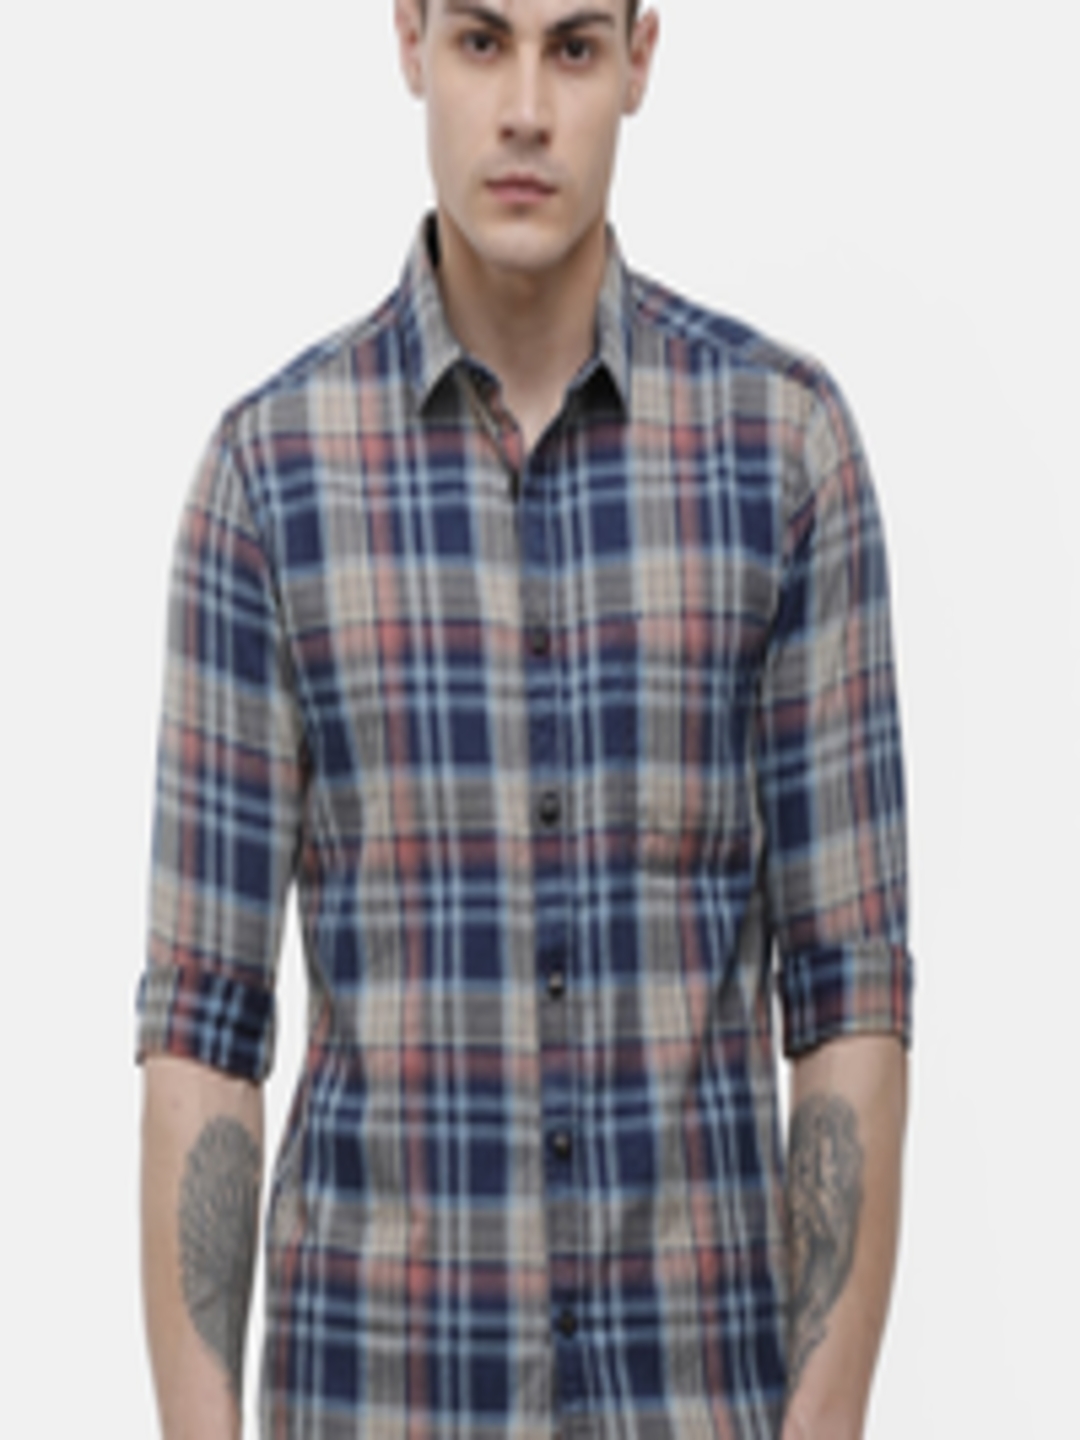 Buy Voi Jeans Men Navy Blue & Beige Slim Fit Checked Casual Shirt ...